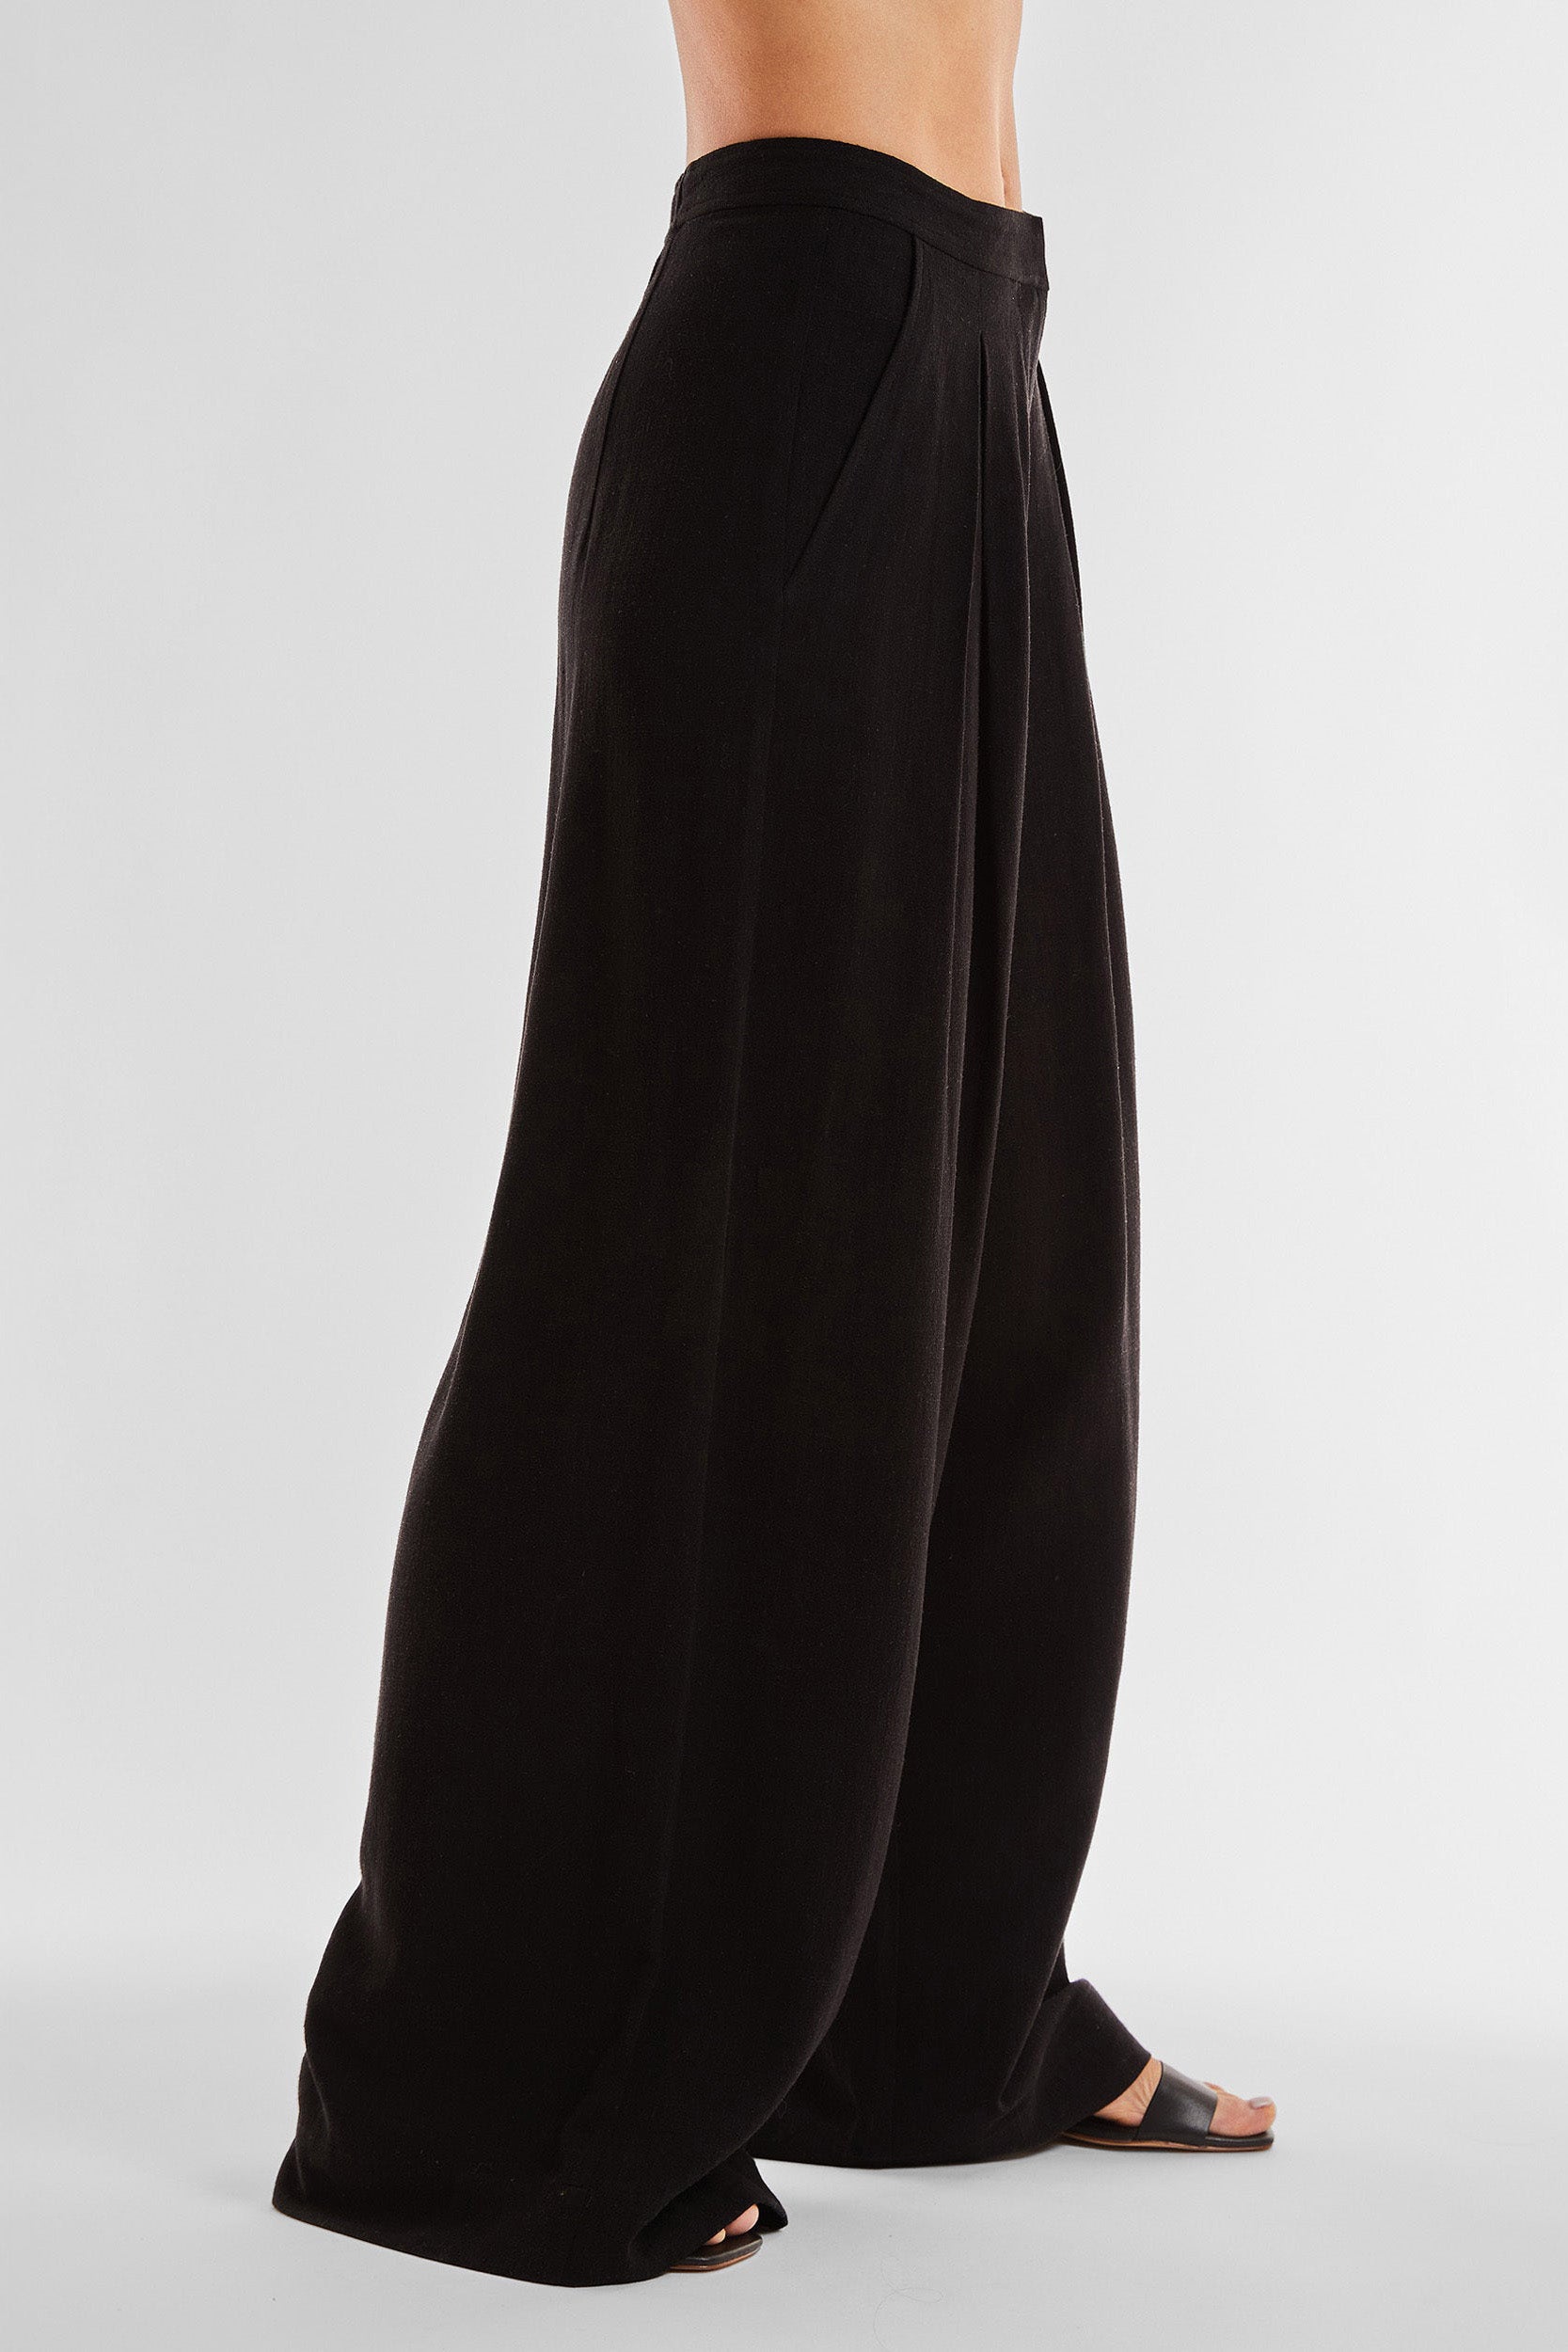 A person is wearing the Seychelles Relaxed Linen Pant - Black, which features a high-waisted, wide-leg design with pleats. The pants have a loose, flowing fit and are paired with black open-toed sandals. The image shows a side view of the lower half of the person's body against a plain background.